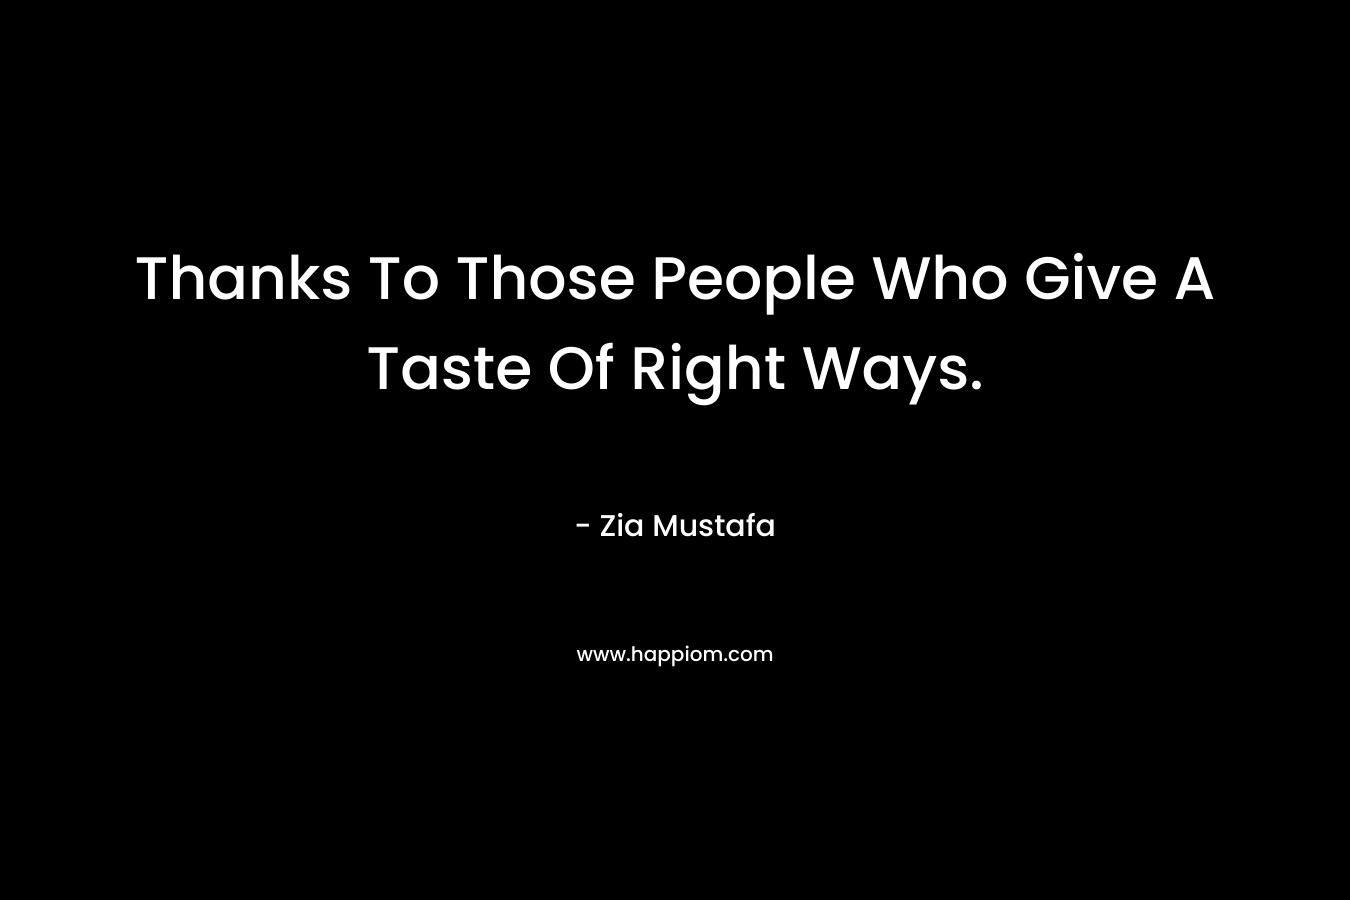 Thanks To Those People Who Give A Taste Of Right Ways.